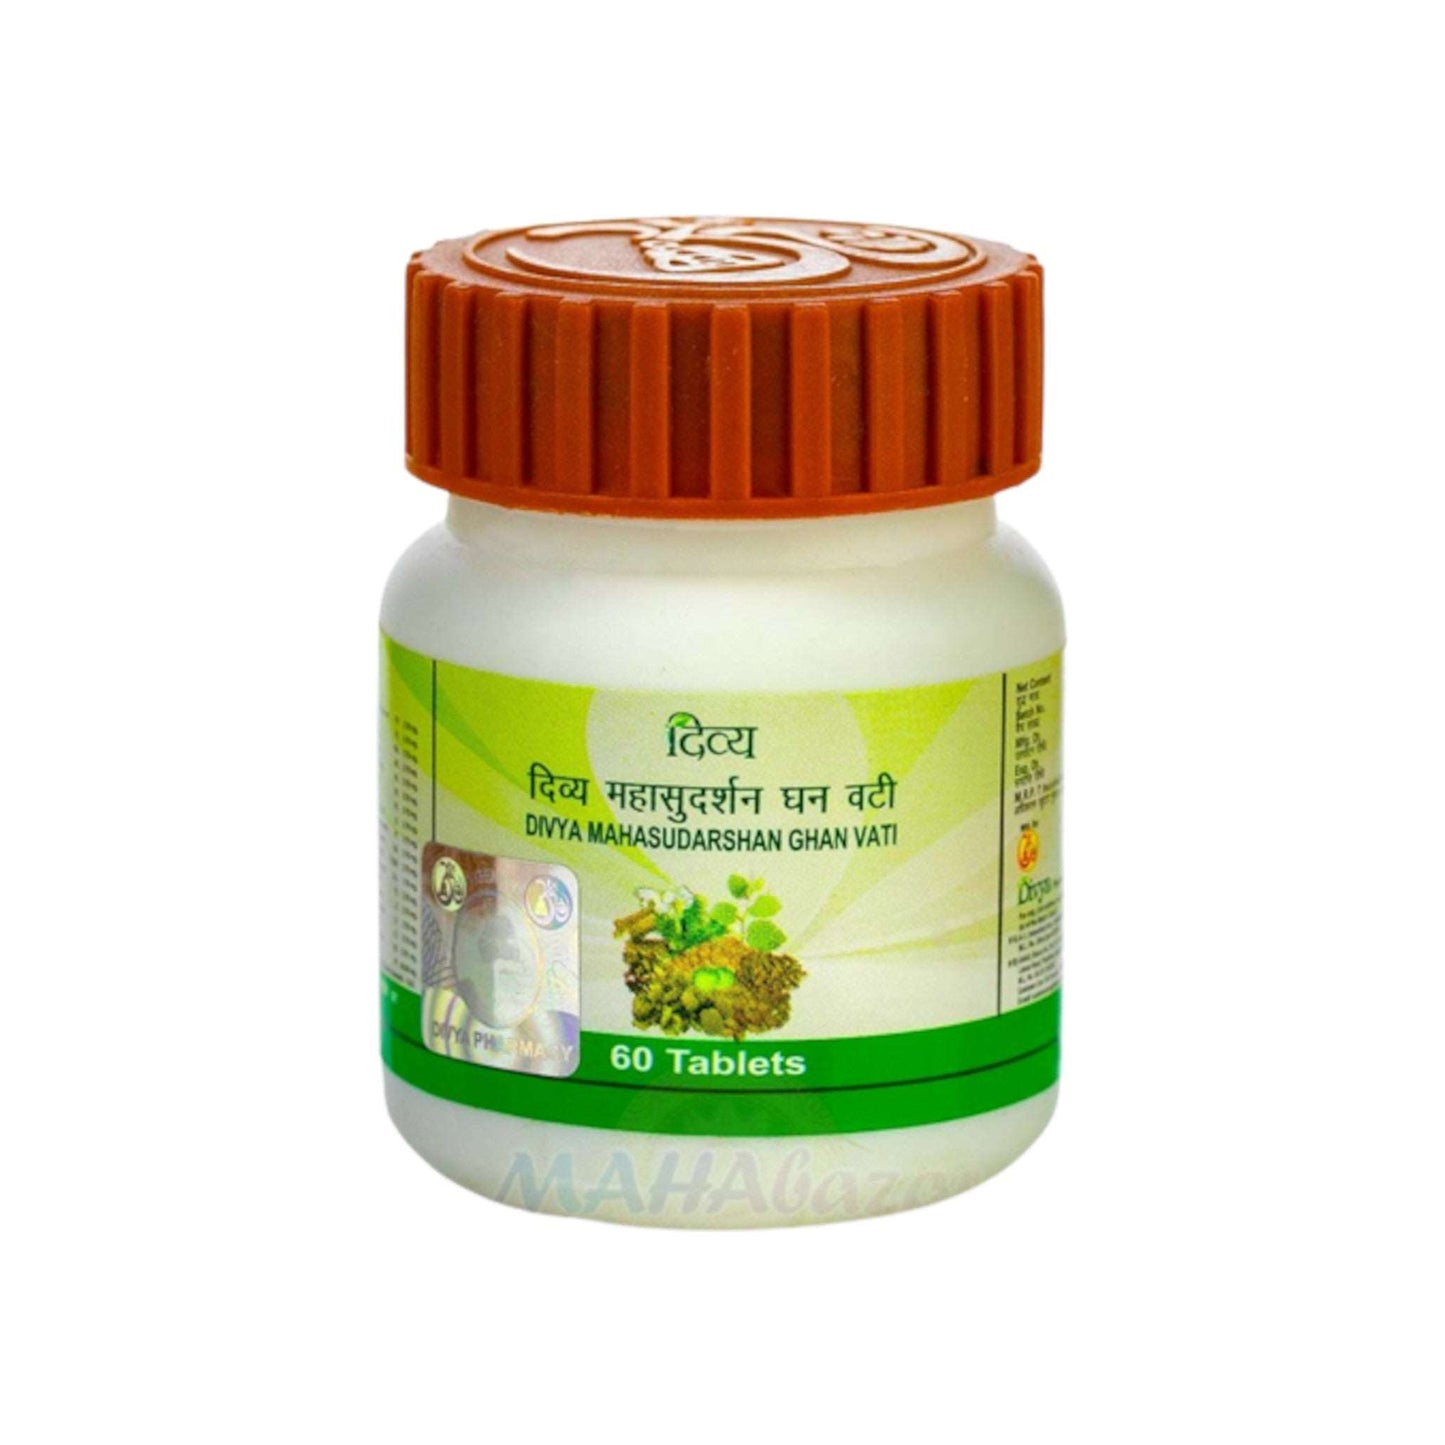 Divya Patanjali Mahasudarshan Ghan Vati Tablets: Ayurvedic remedy for fever, cold, and viral infections. Boosts immunity.